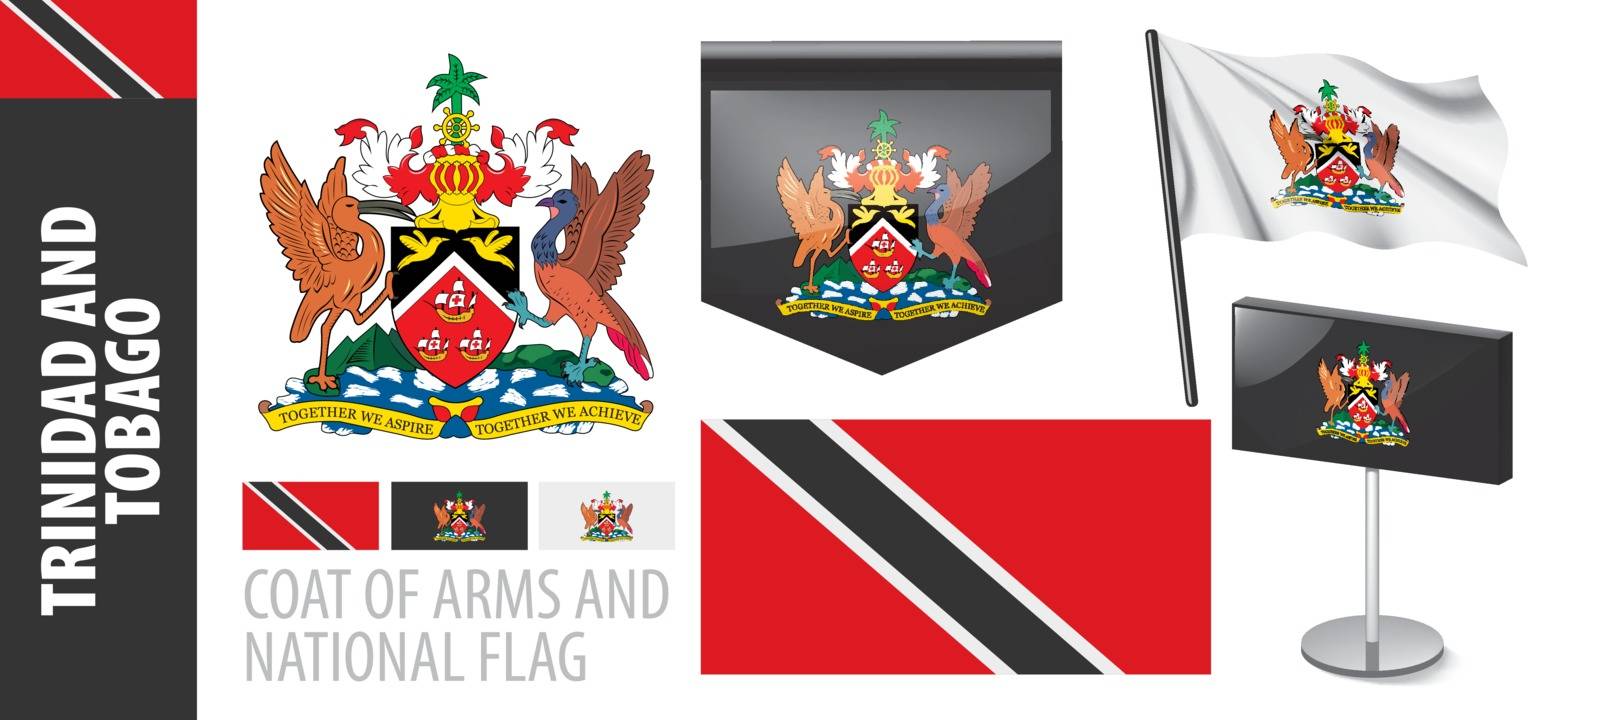 Vector set of the coat of arms and national flag of Trinidad and Tobago.